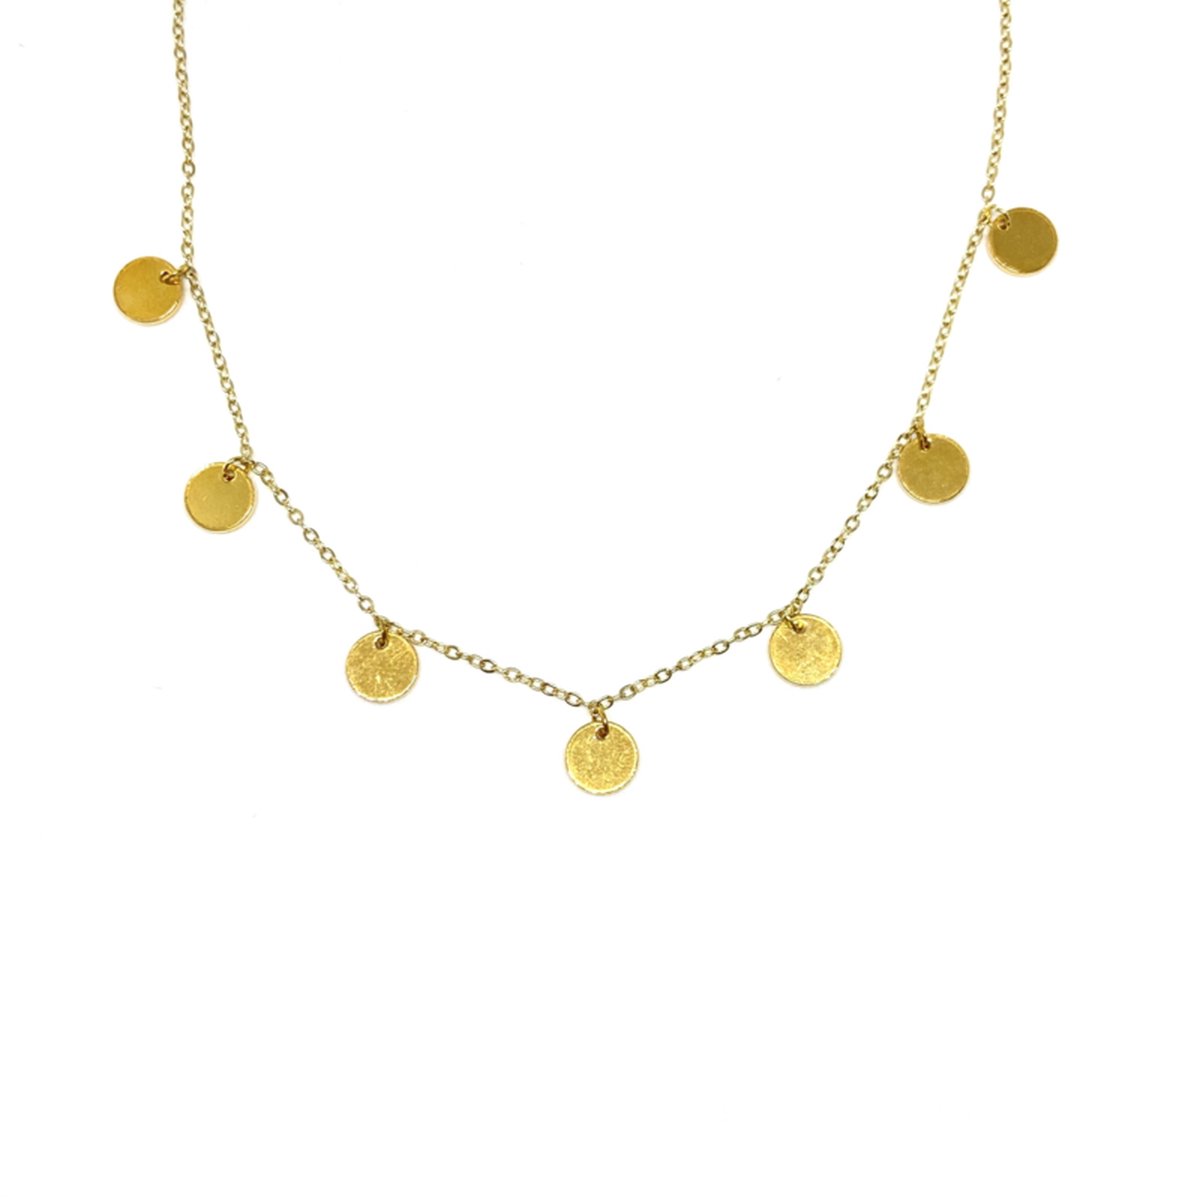 Coins necklace - gold